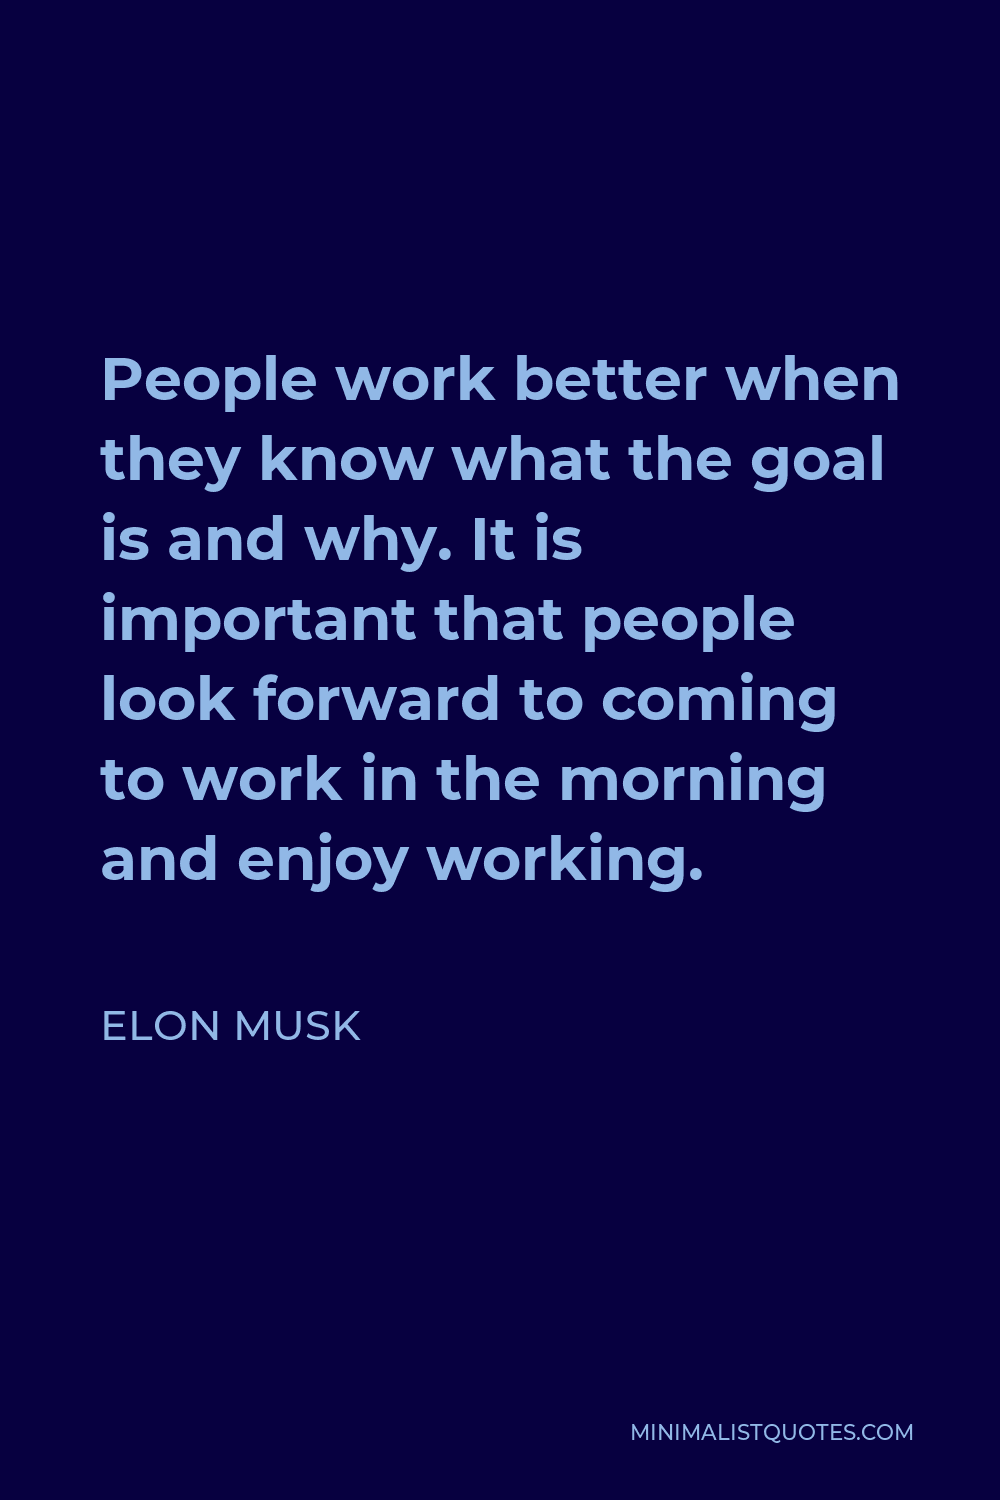 Elon Musk Quote: People work better when they know what the goal is and ...